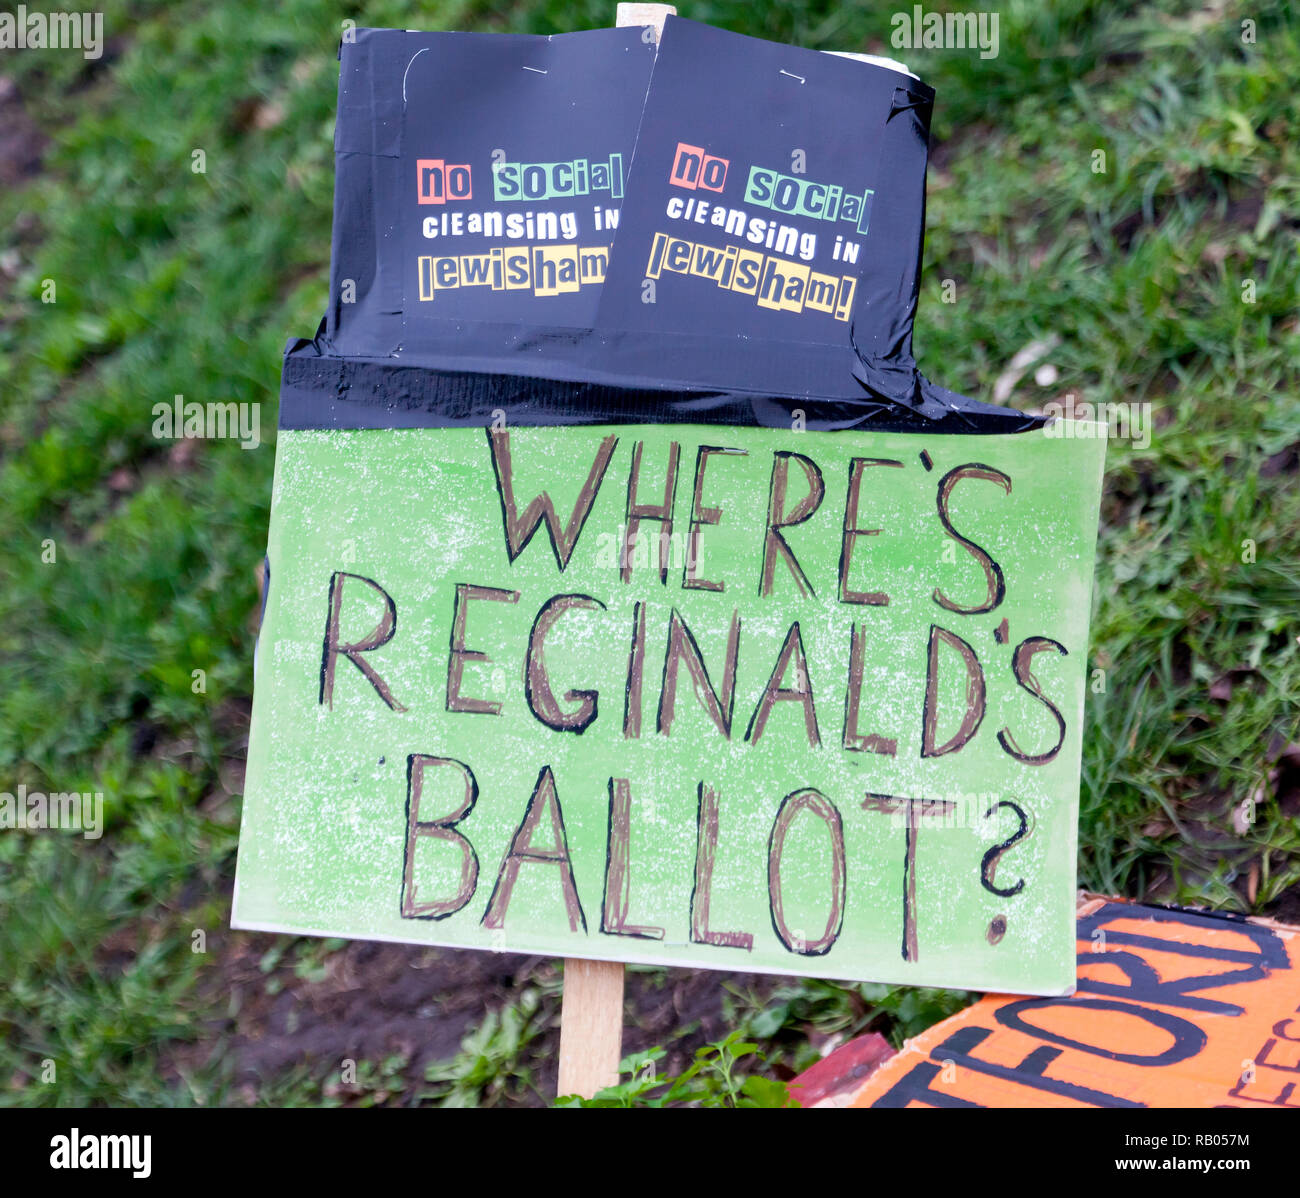 Close-up  image of banners protesting about ther lack of democracy by Lewisham Council,  who plan to destroy Reginald House and Old Tidemill Wildlife Garden, Deptford, Lewisham Stock Photo